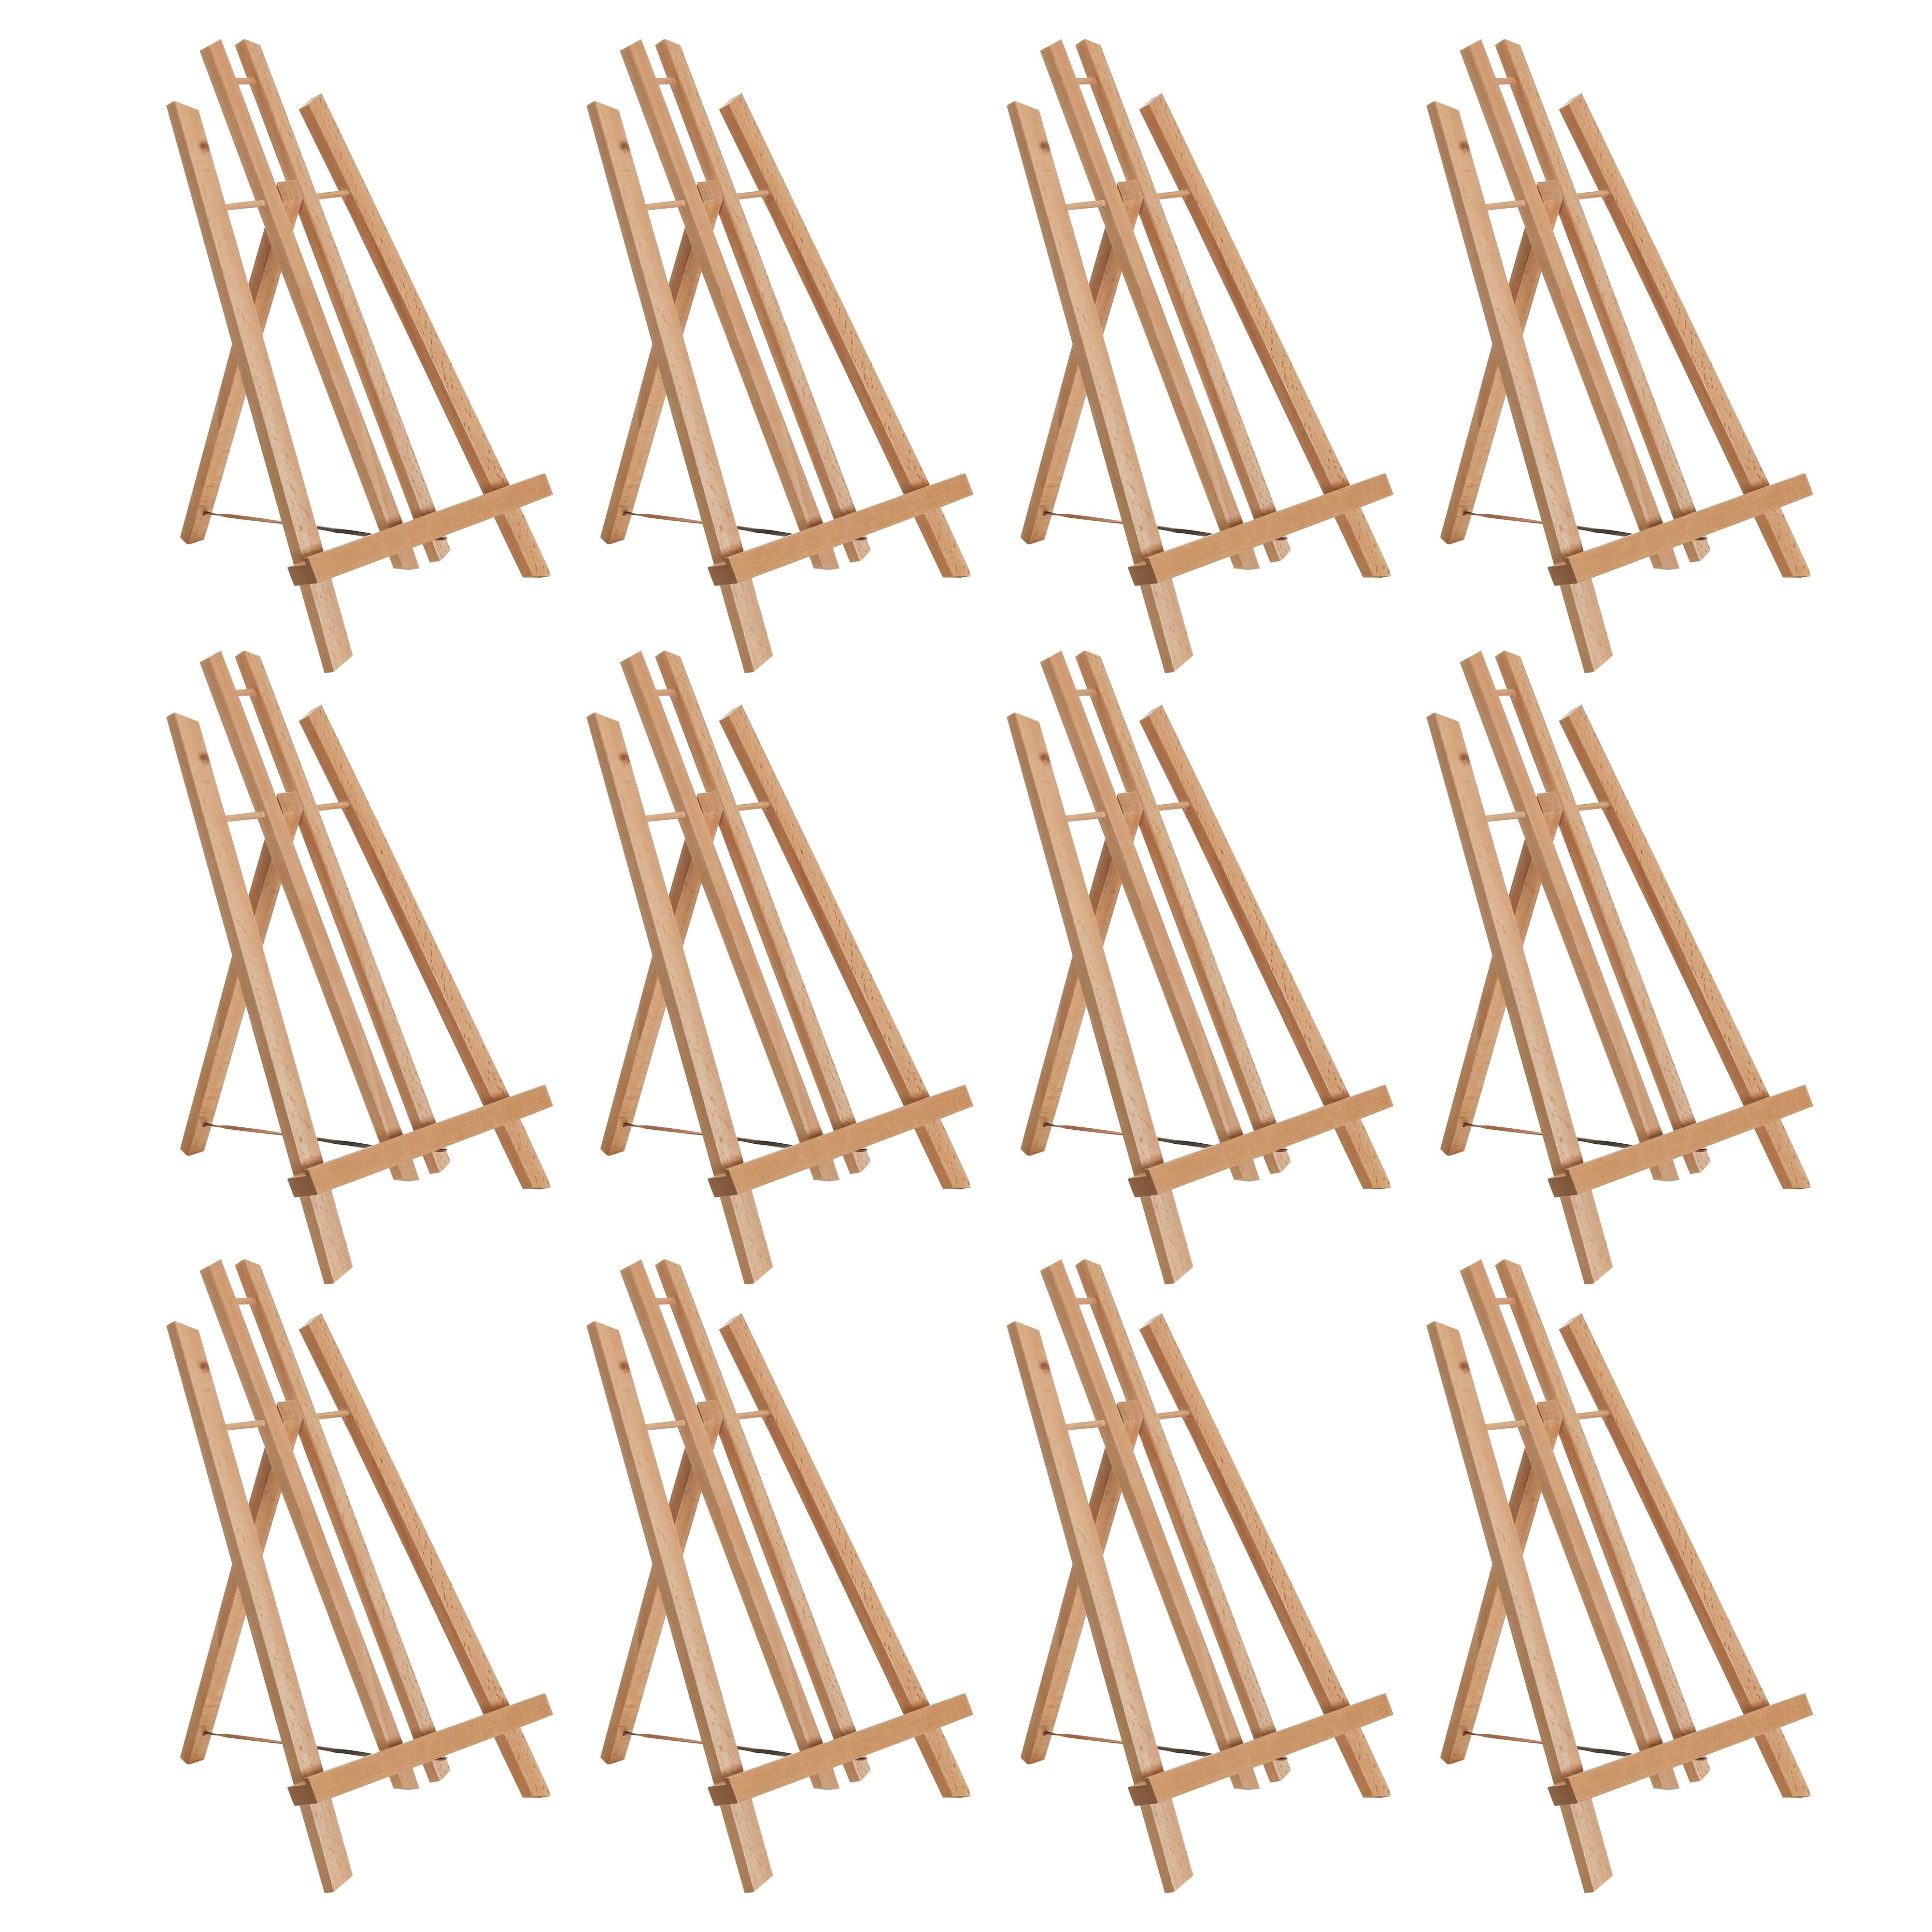 Hold Canvas Art up to 14 High 12PCS Medium Tabletop Display Solid Beech Wood Easel for Artist Kids Adults Classroom/Parties Painting Display MEEDEN 16 Tall Tabletop Easel Standing Easel 